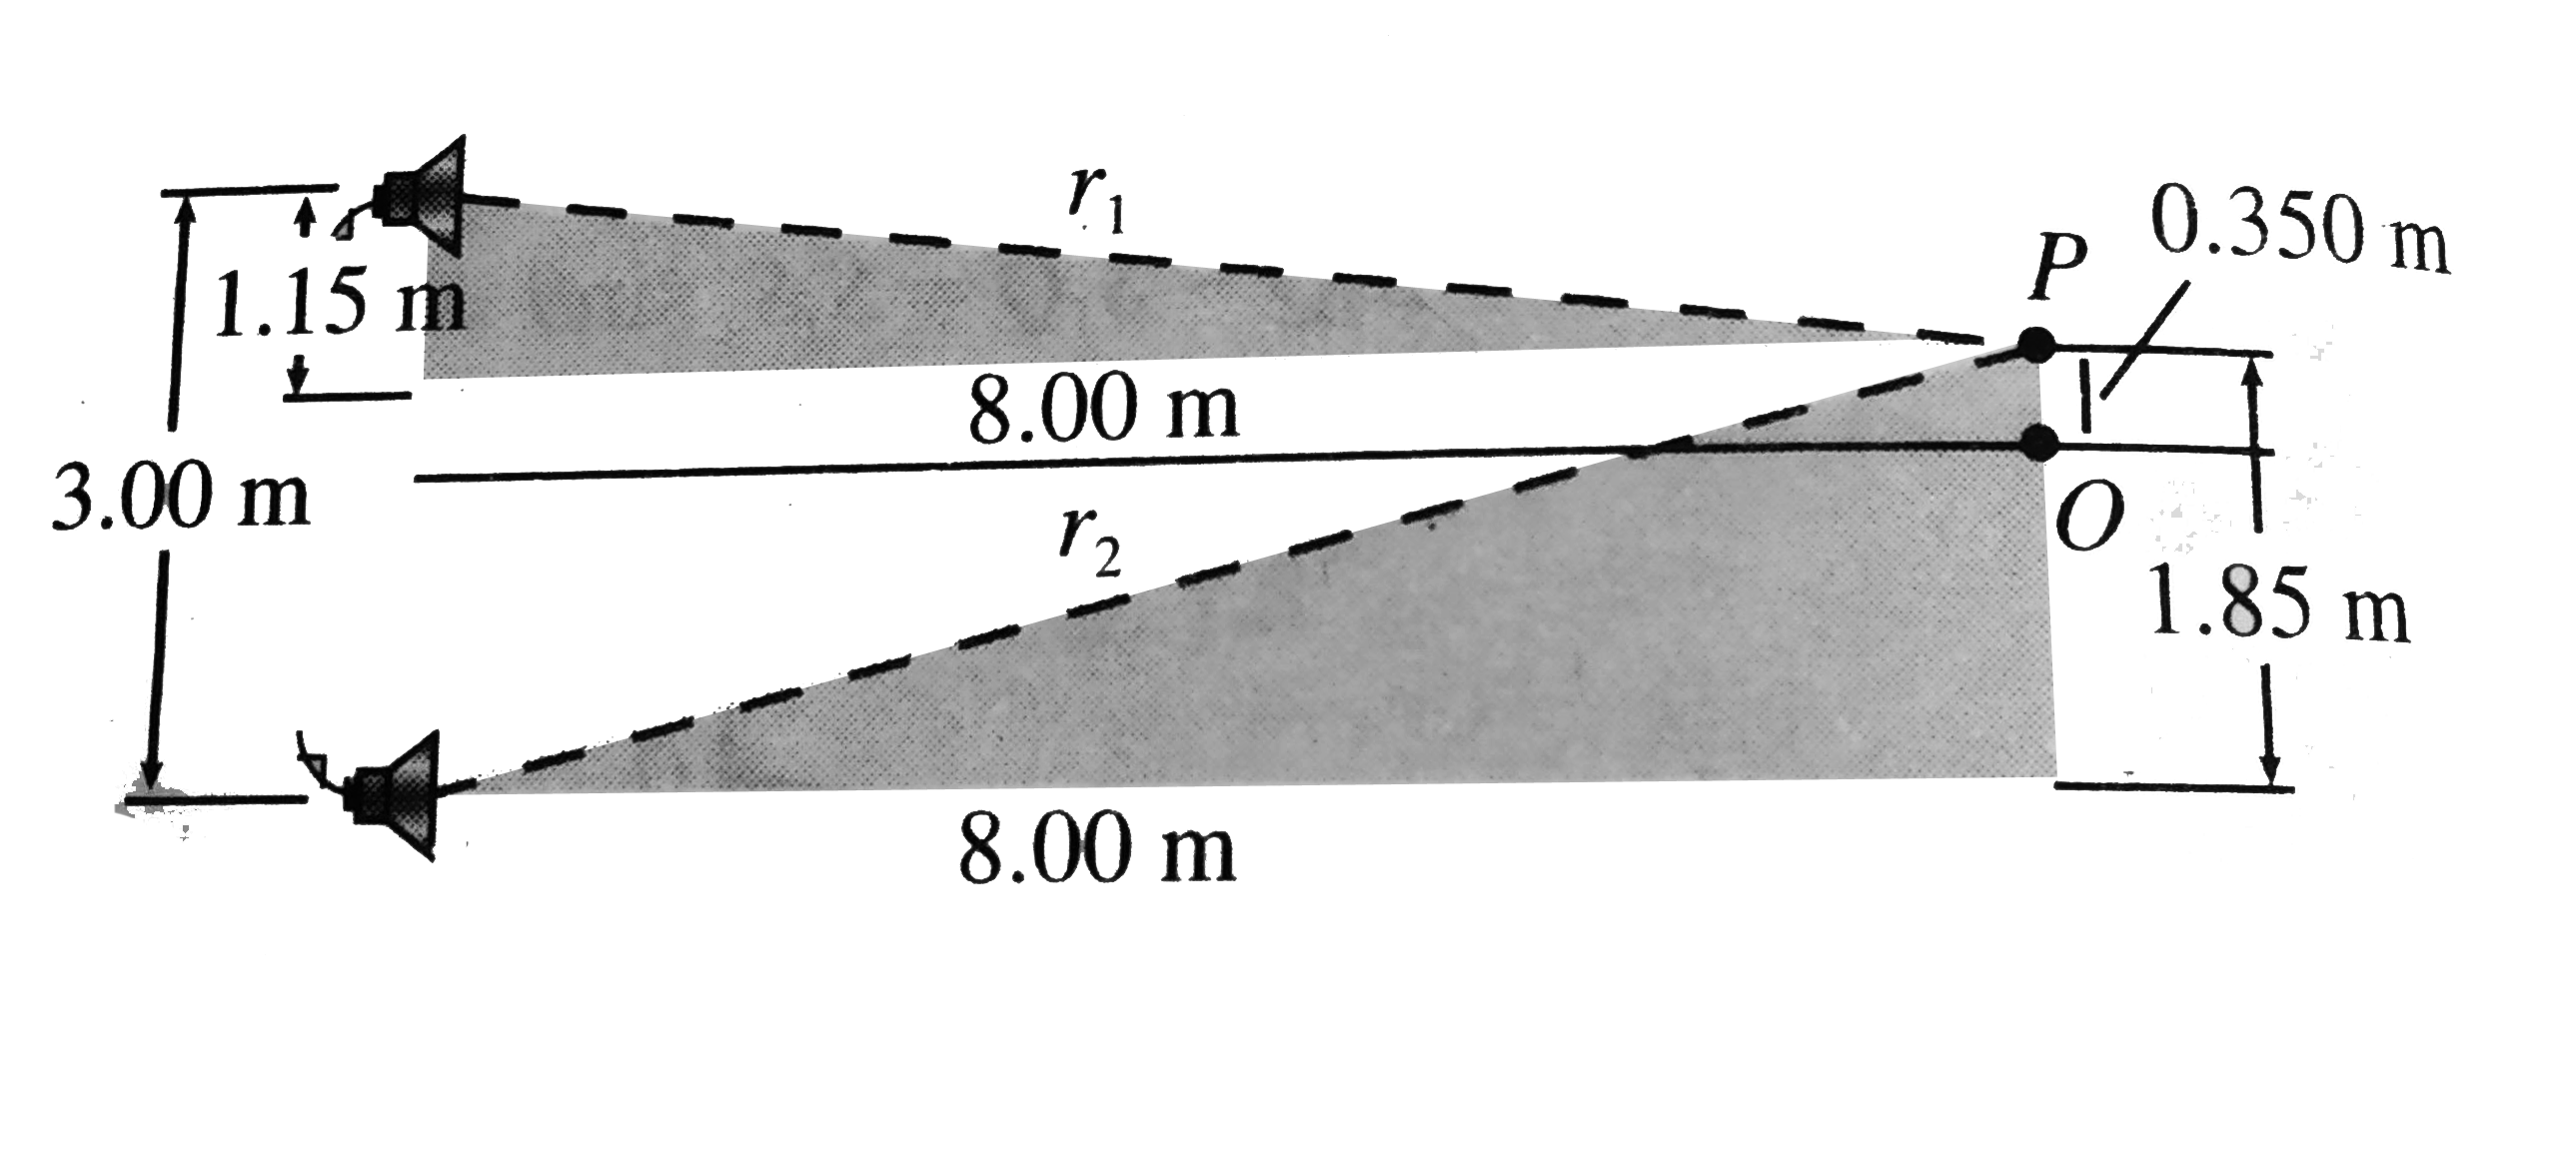 Two identical loudspeakers placed 3.00 m apart are driven by the same oscillator as shown in Fig. 7.12. A listener is originally at point O , located 8.00 m from the centre of the line connecting the two speakers. The listener then moves to point P, which is a perpendicular distance 0.350 m from O , and she experiences the first minimum sound intensity . What is the frequency of the oscillator ?